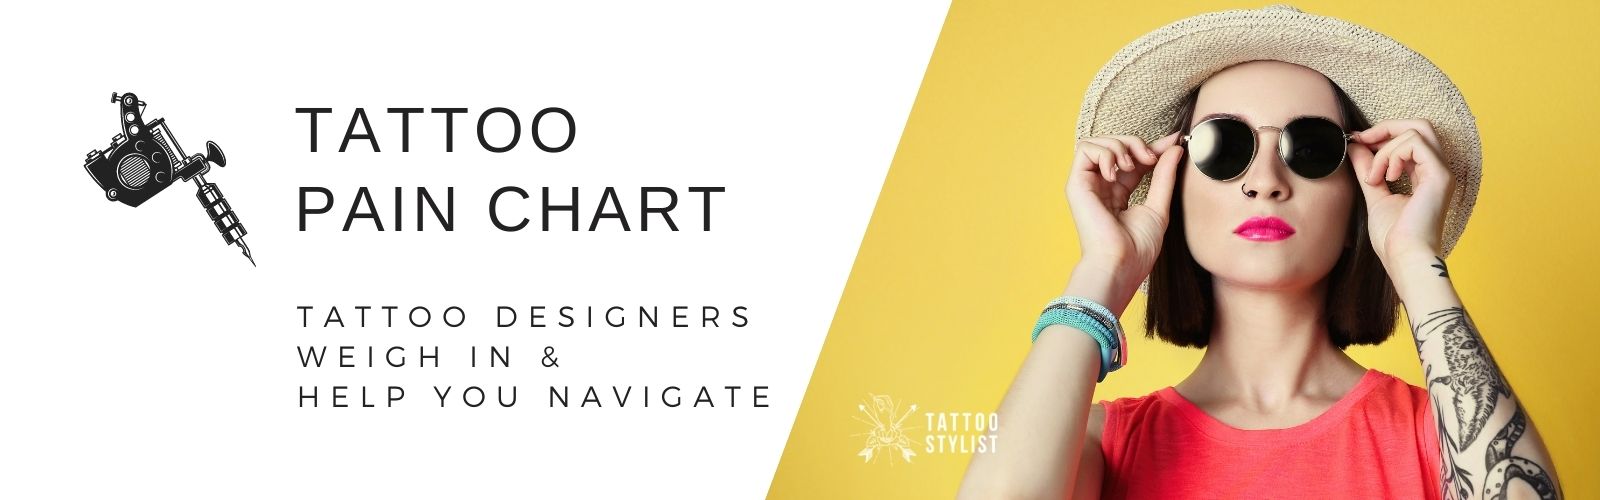 Scared Of Tattoo Pain? Here Are The Facts You Need (Tattoo Pain Chart Included) - Tattoo Stylist